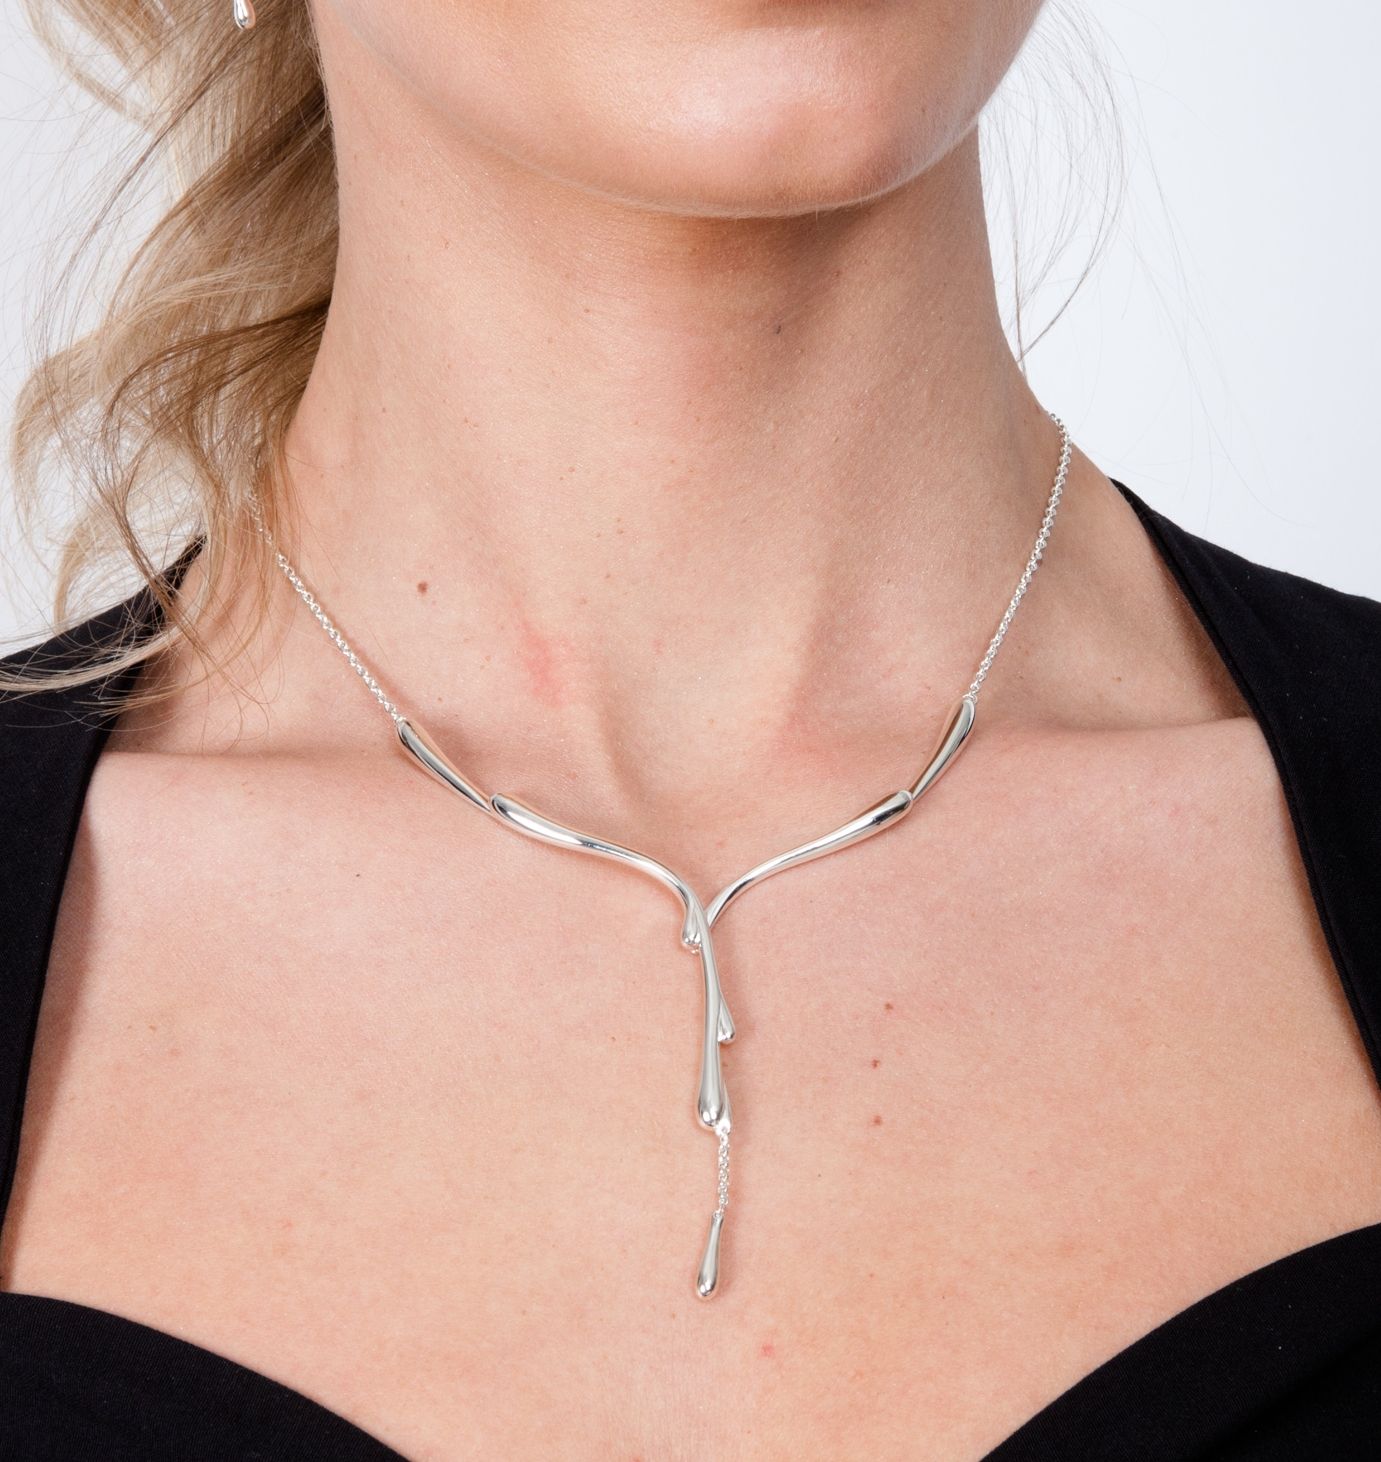 Silver dripping necklace